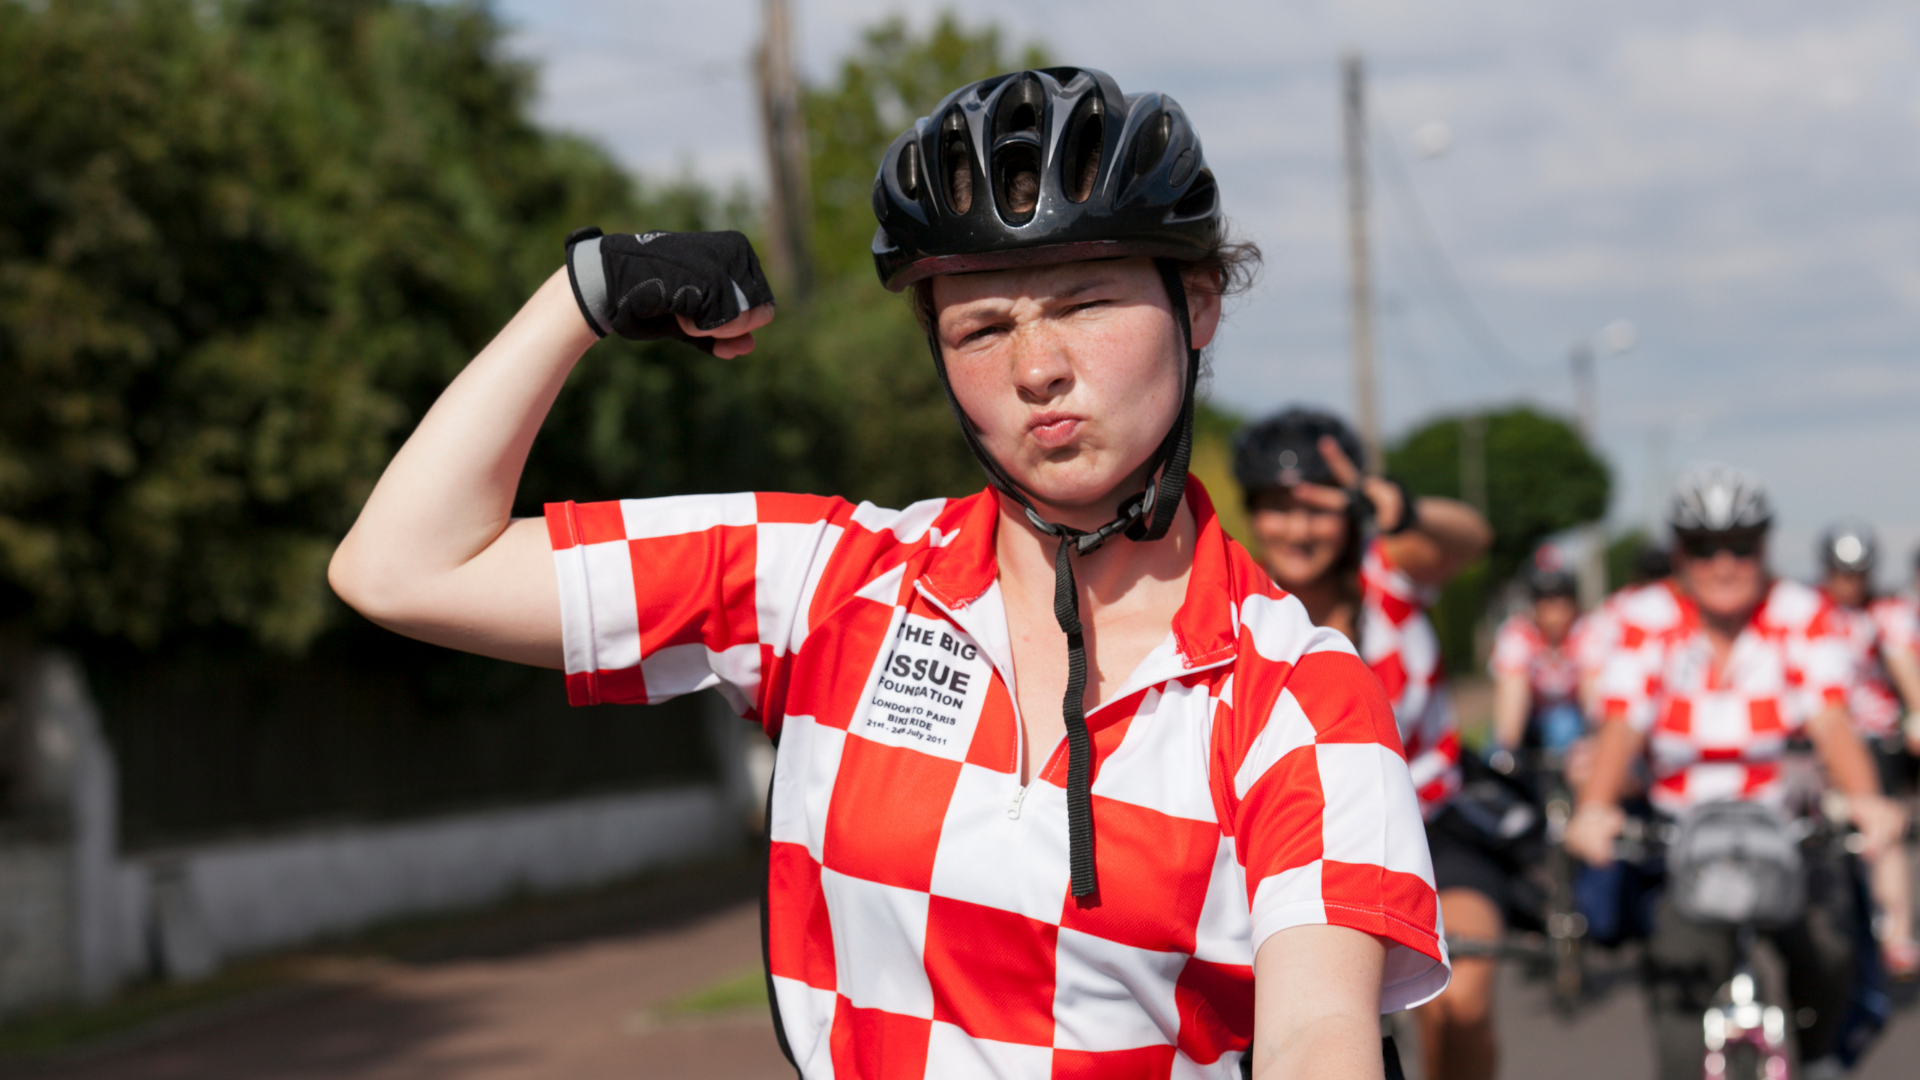 Women in Big Issue Foundation cycling jersey and helmet making a strong pose